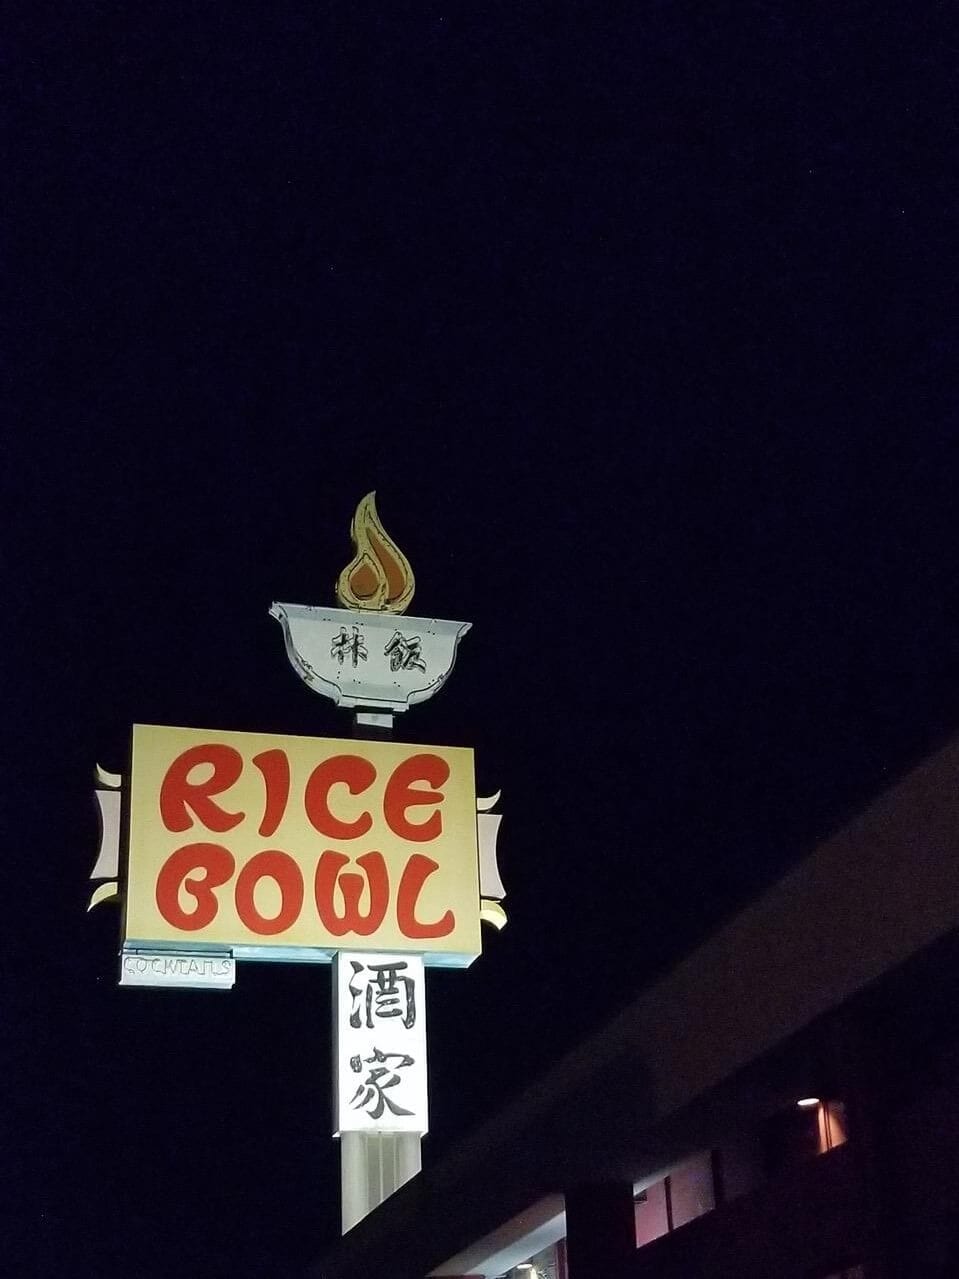 Chinese restaurant sign at night